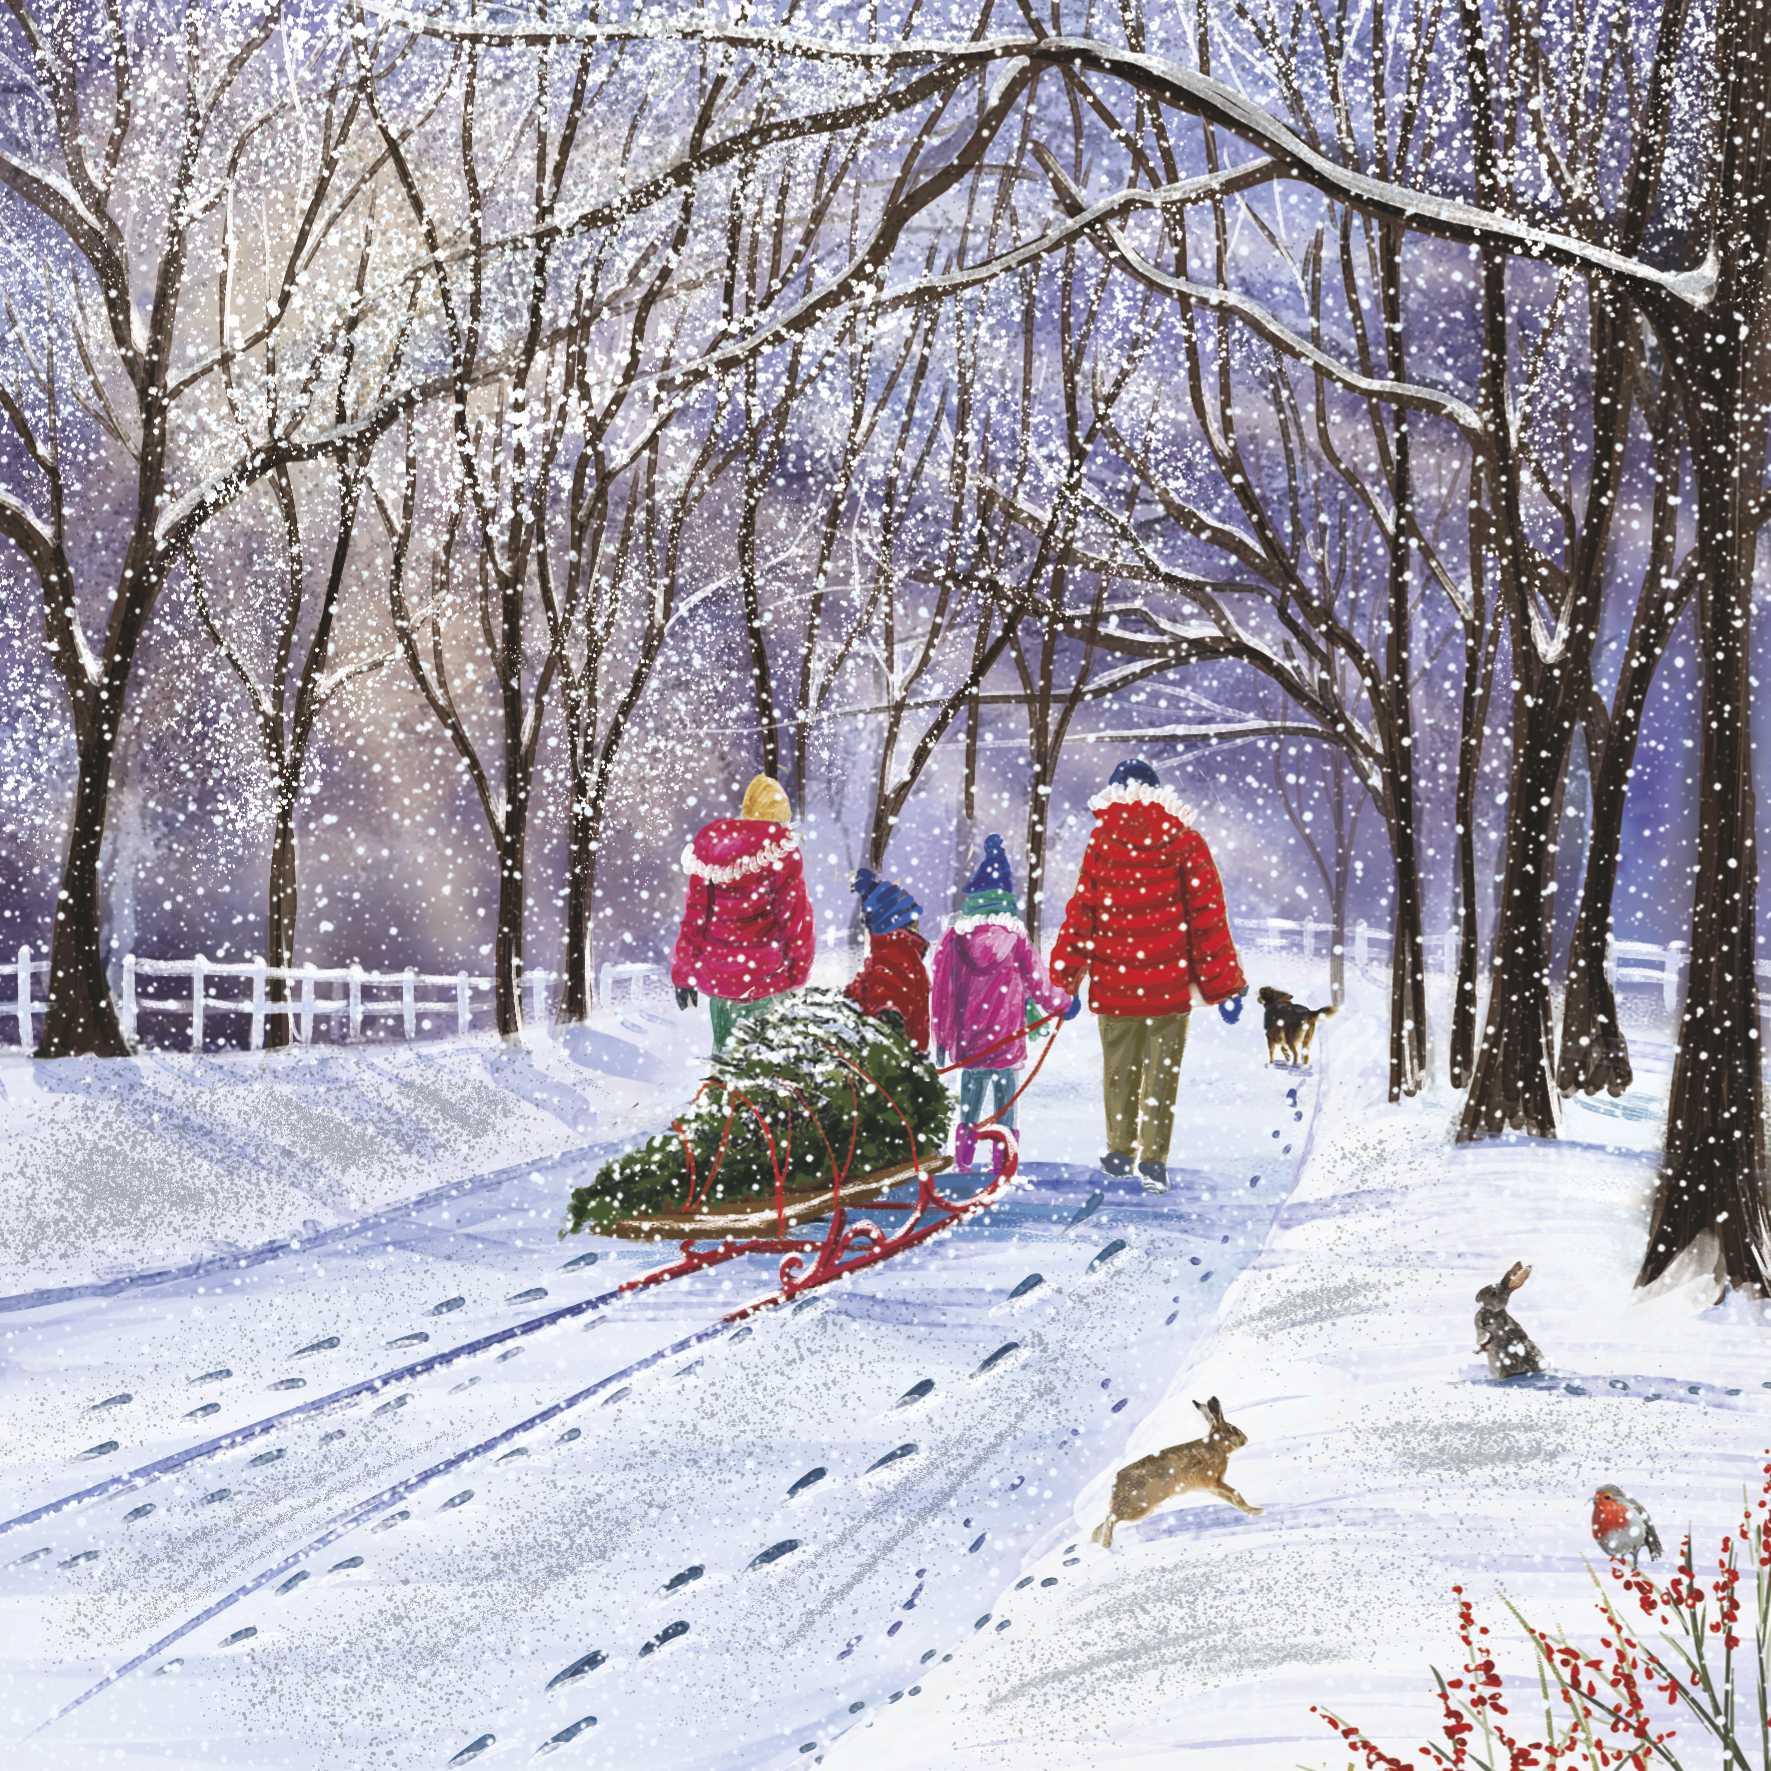 Illustration. A tree-lined lane covered in snow. A family of two adults, two children and a dog can be seen from behind, walking along pulling a Christmas tree on a red sled. A robin and two hares can be seen in the foreground.